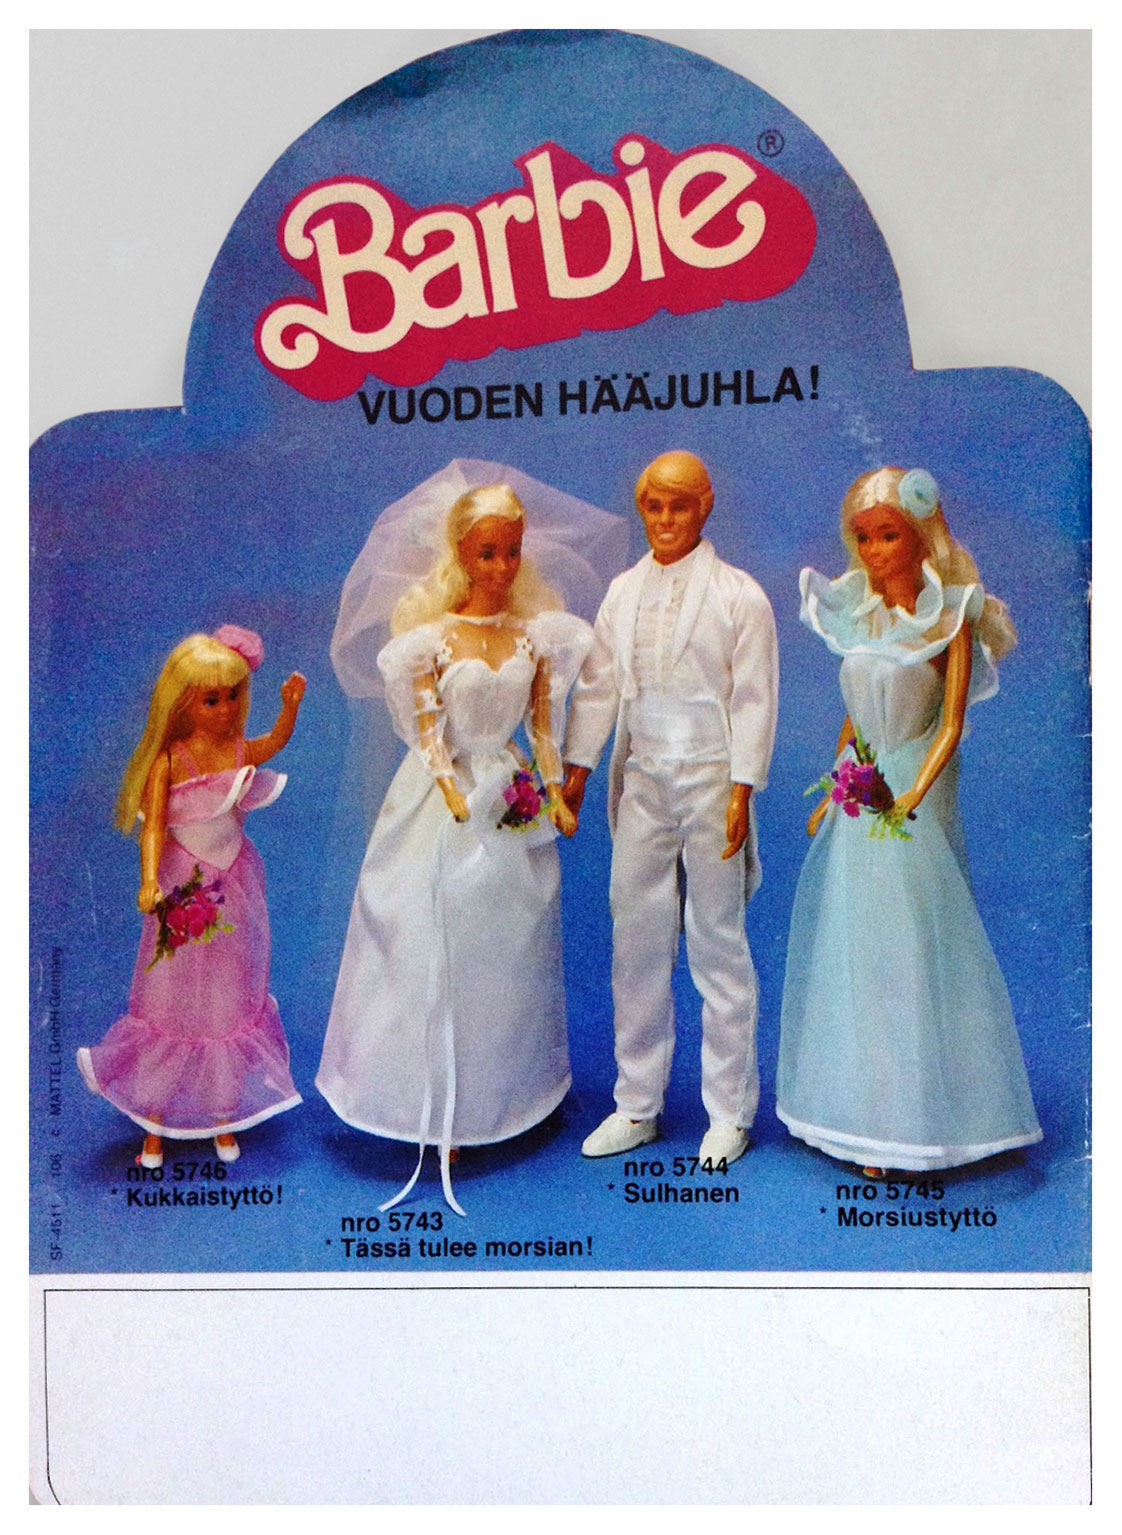 From 1983 Finnish Barbie booklet